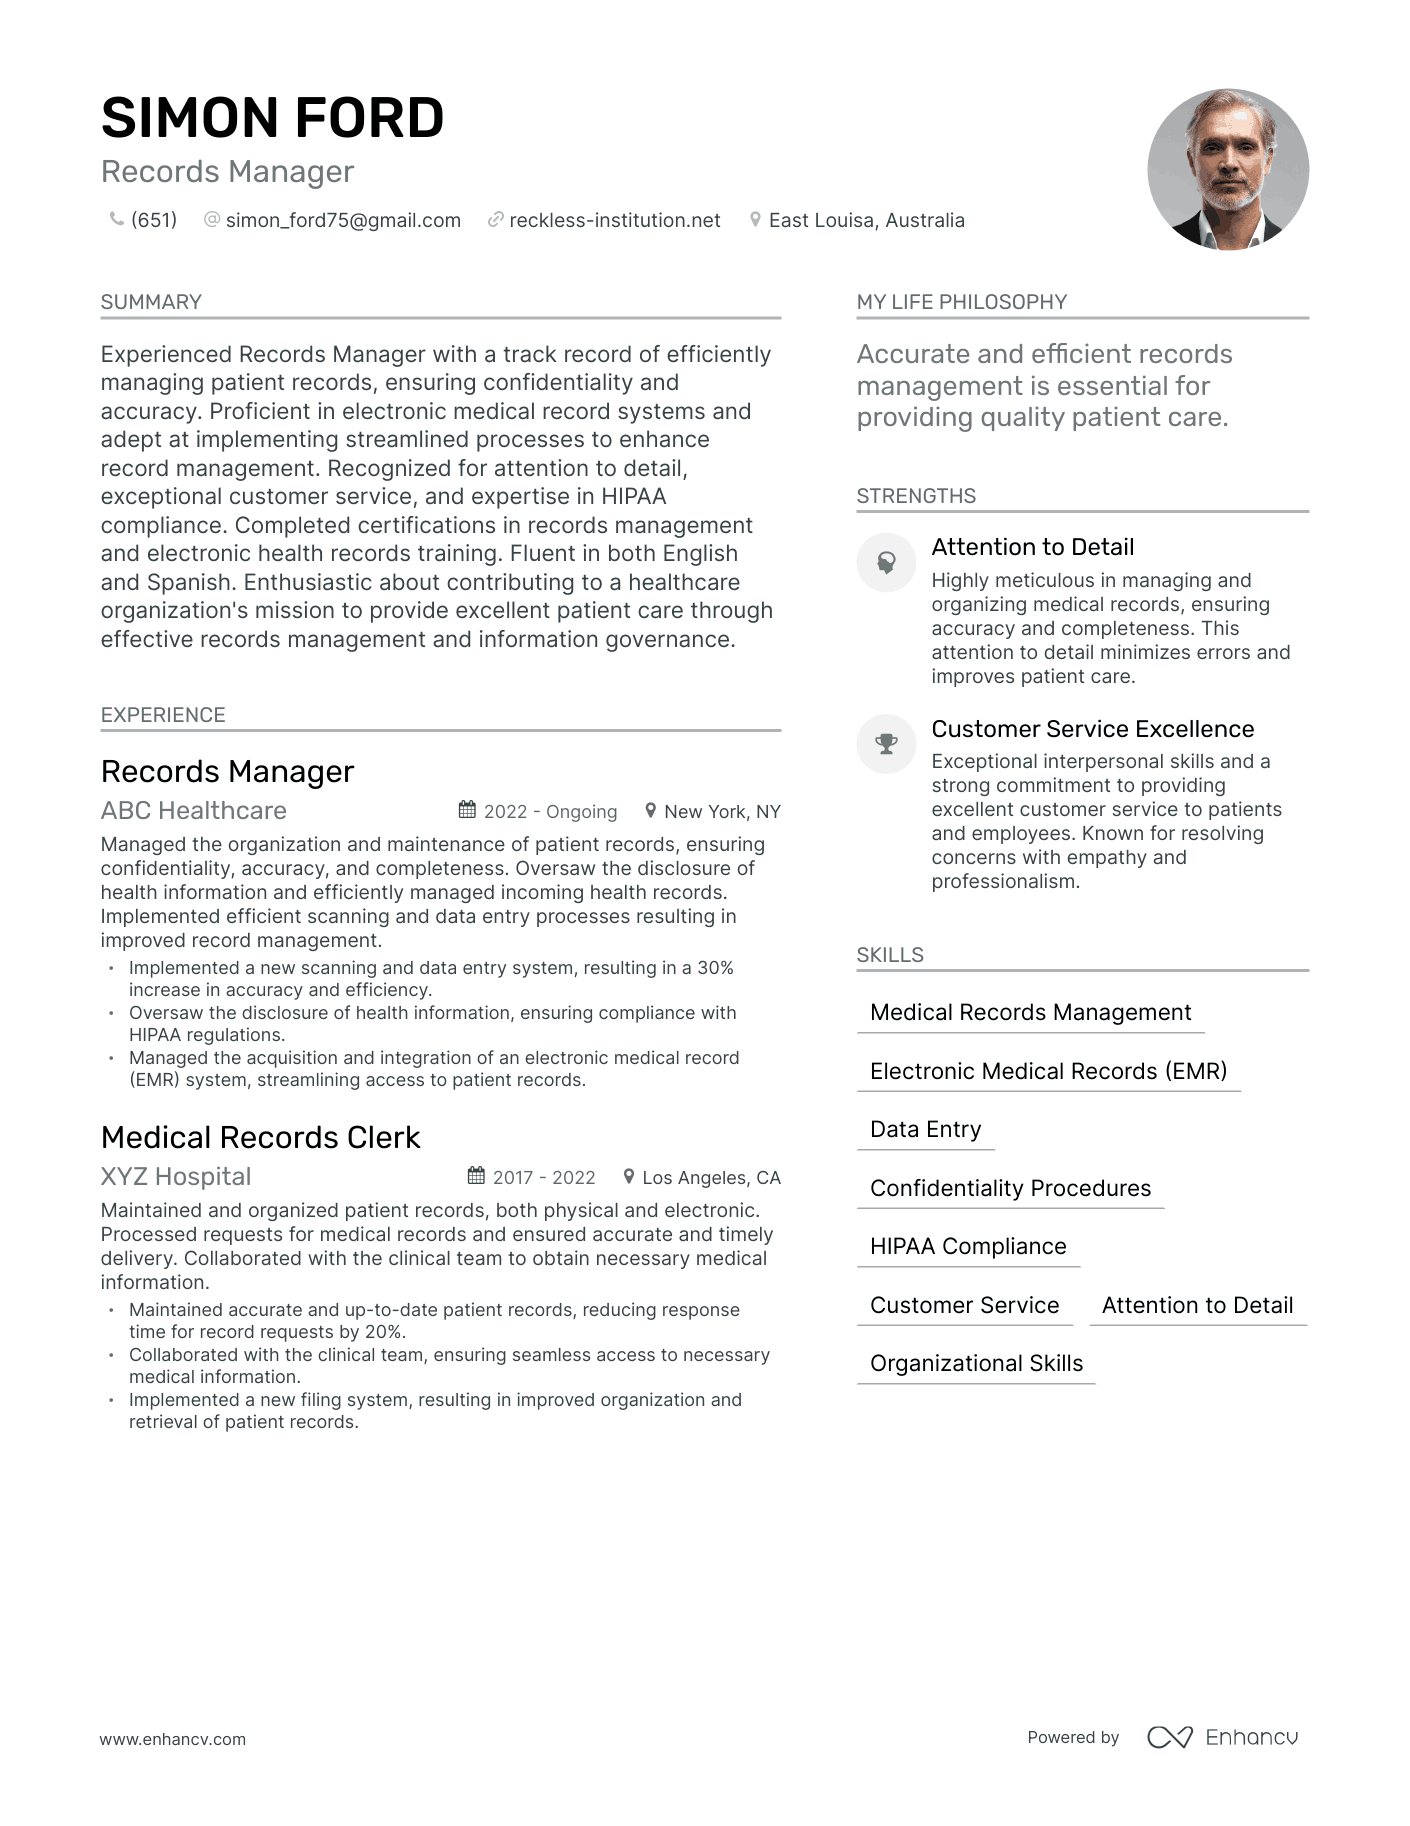 Records Manager resume example